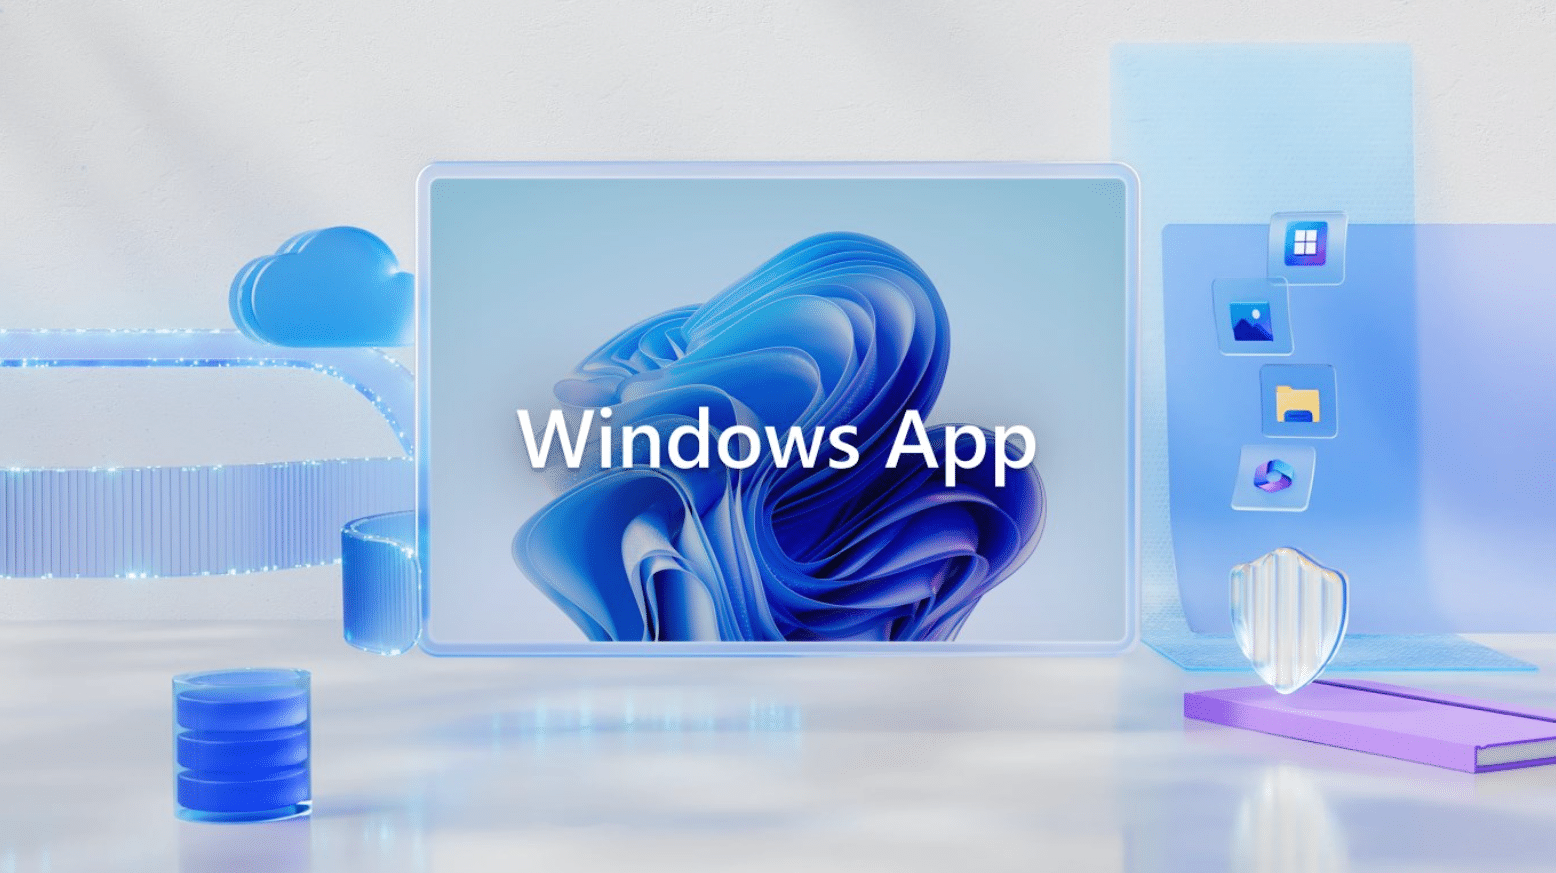 Microsoft unveils new 'Windows App' for iOS, Android, and web